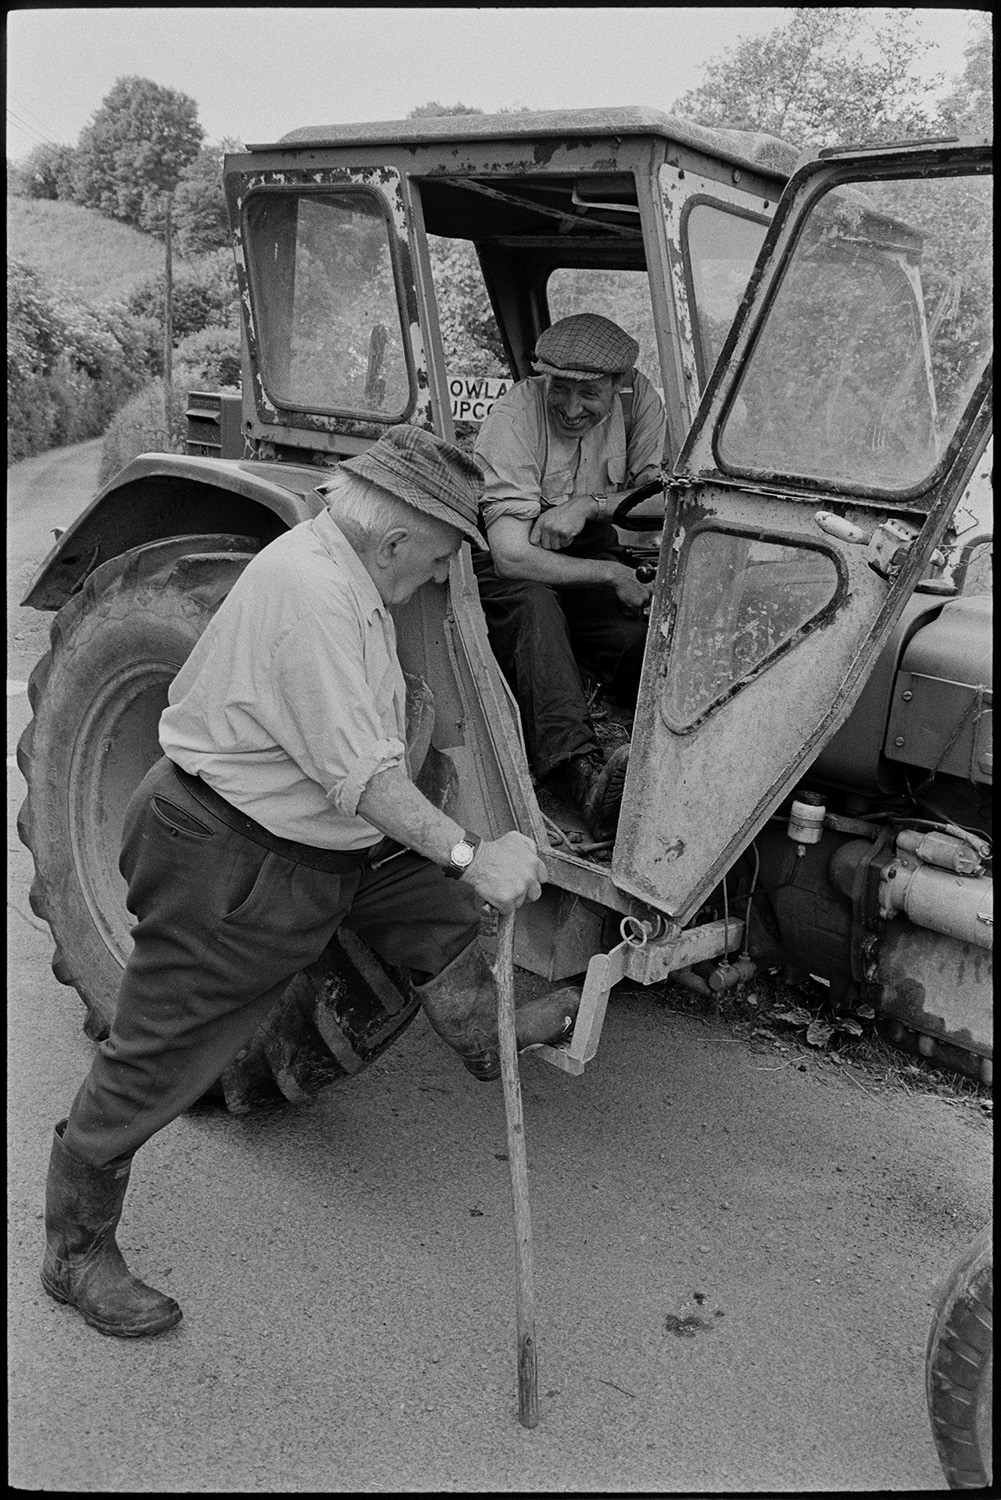 Farmers chatting in road, dog and tractor. 
[Archie Parkhouse leaning on a tractor and walking stick, talking to George Ayre who is sat in the cab of the tractor, in a lane at Millhams, Dolton.]